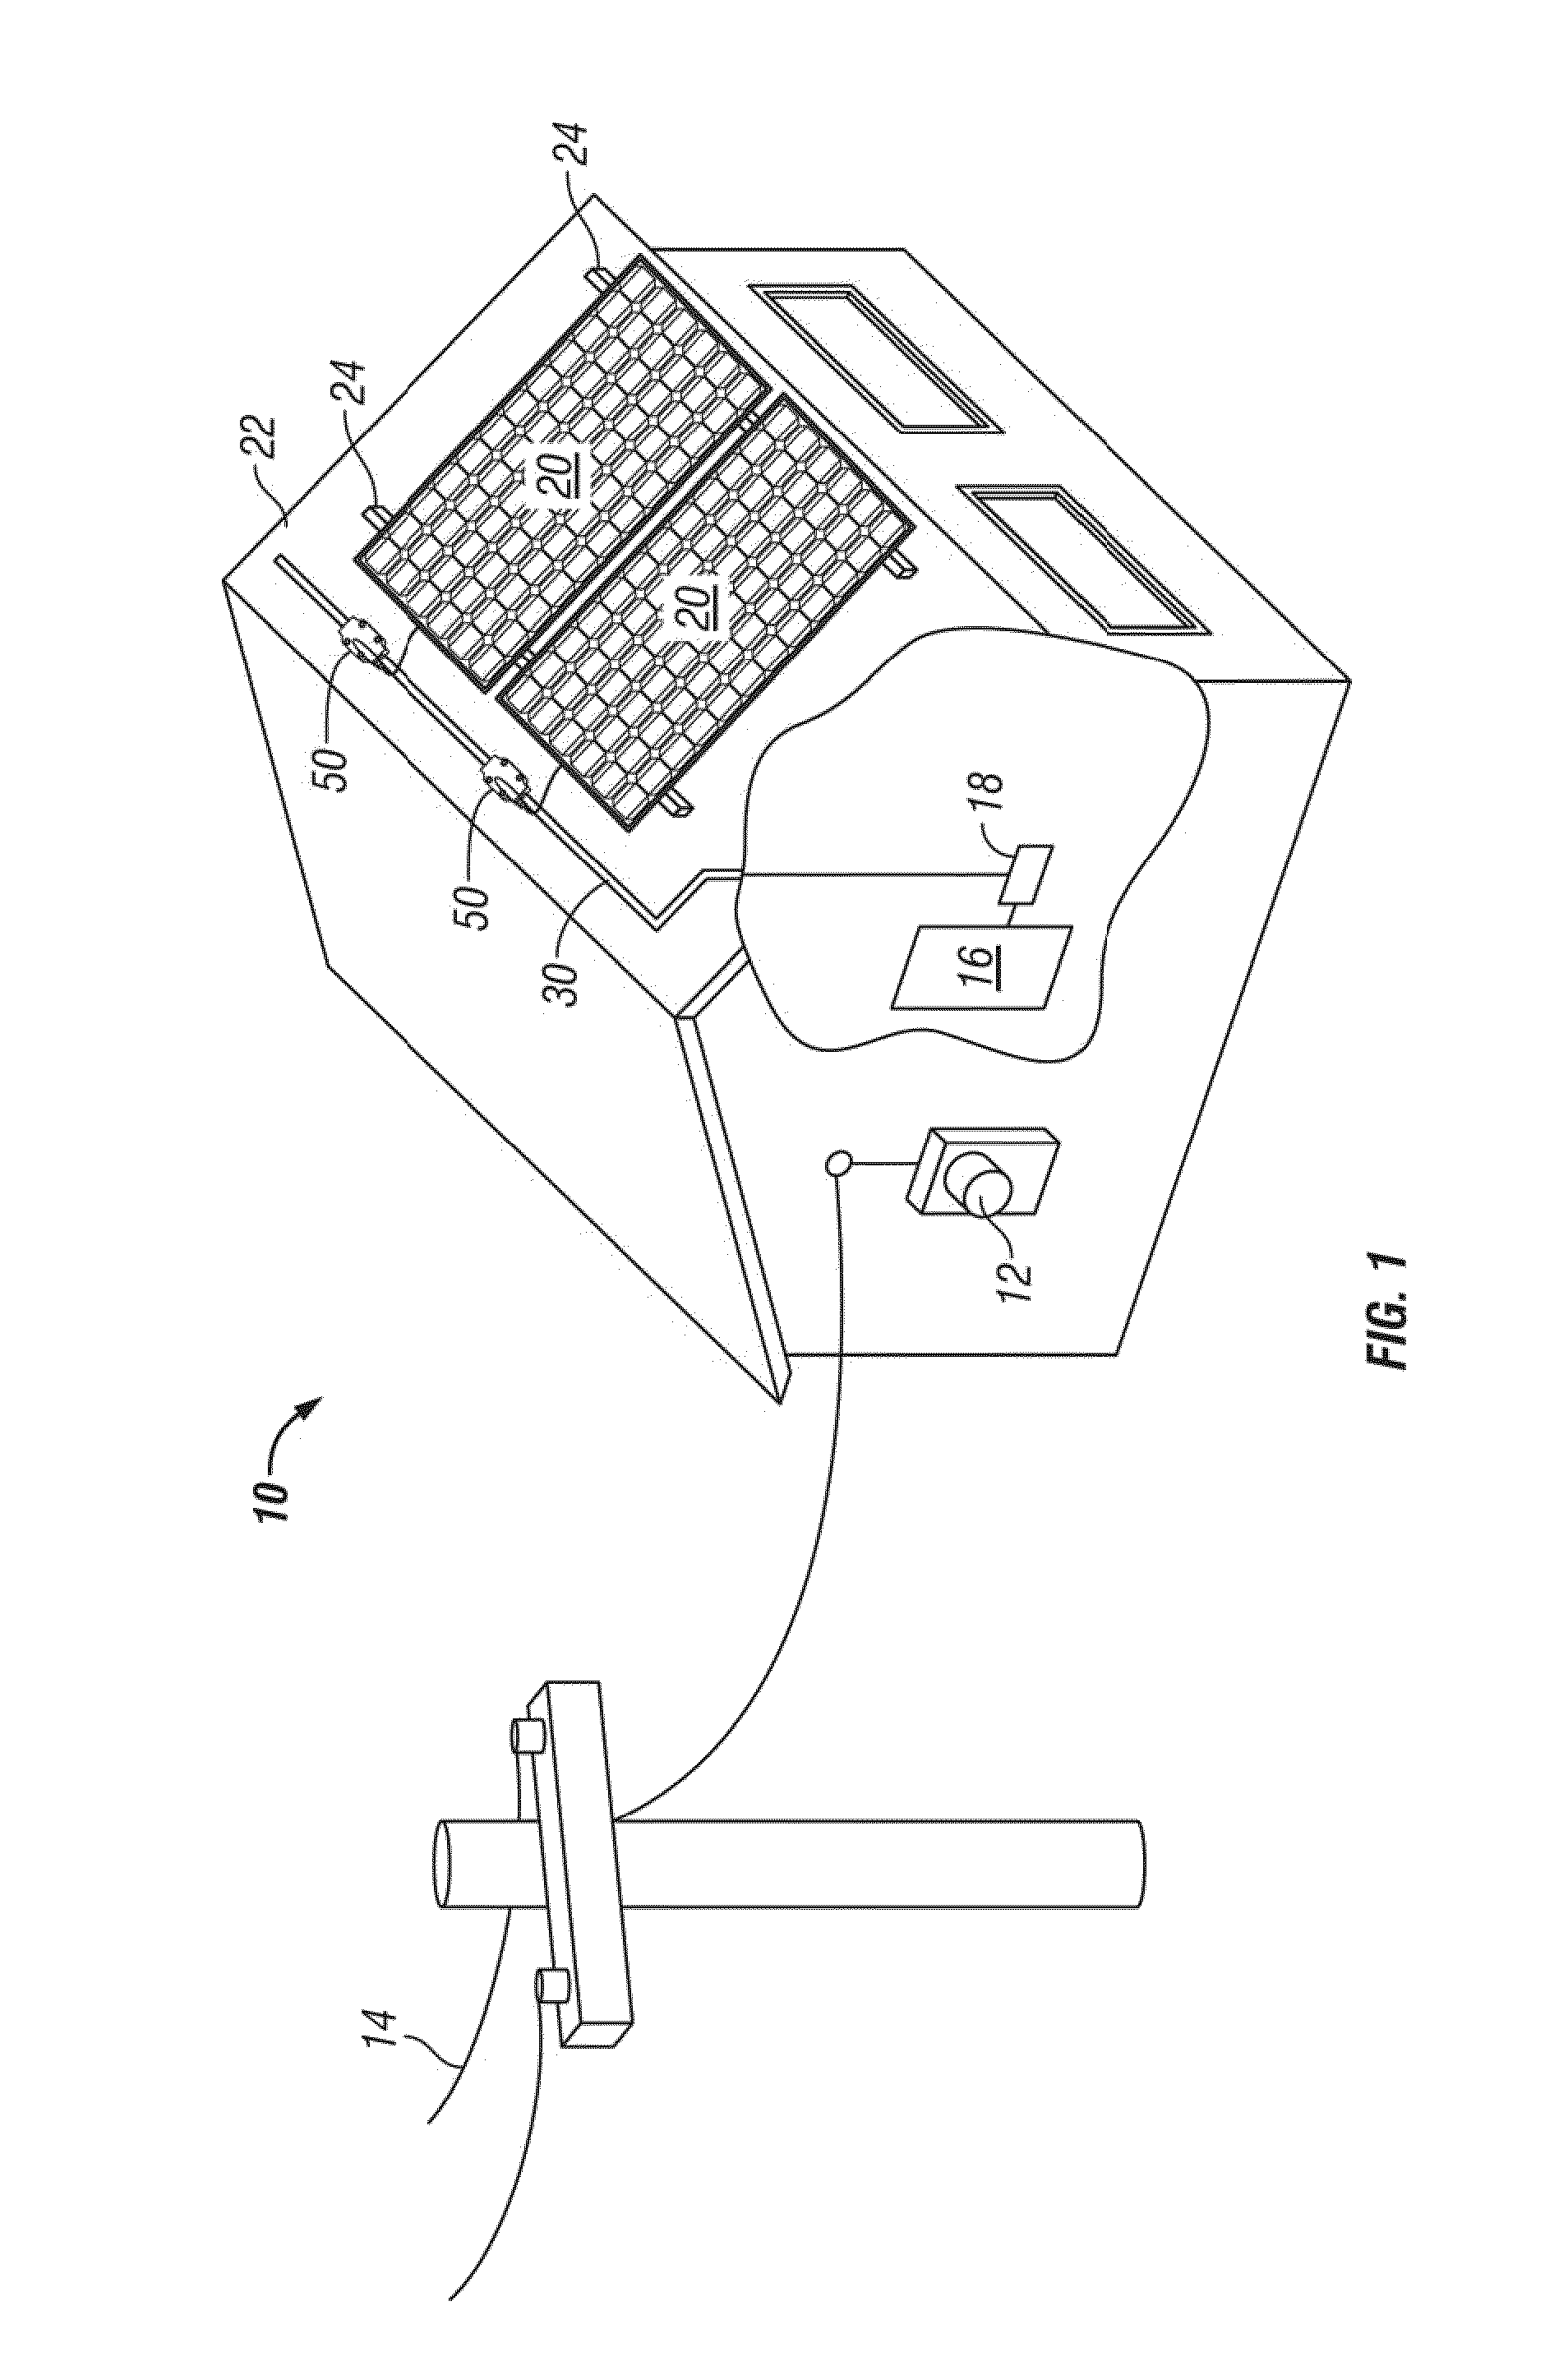 Connector with conductor piercing prongs for a solar panel